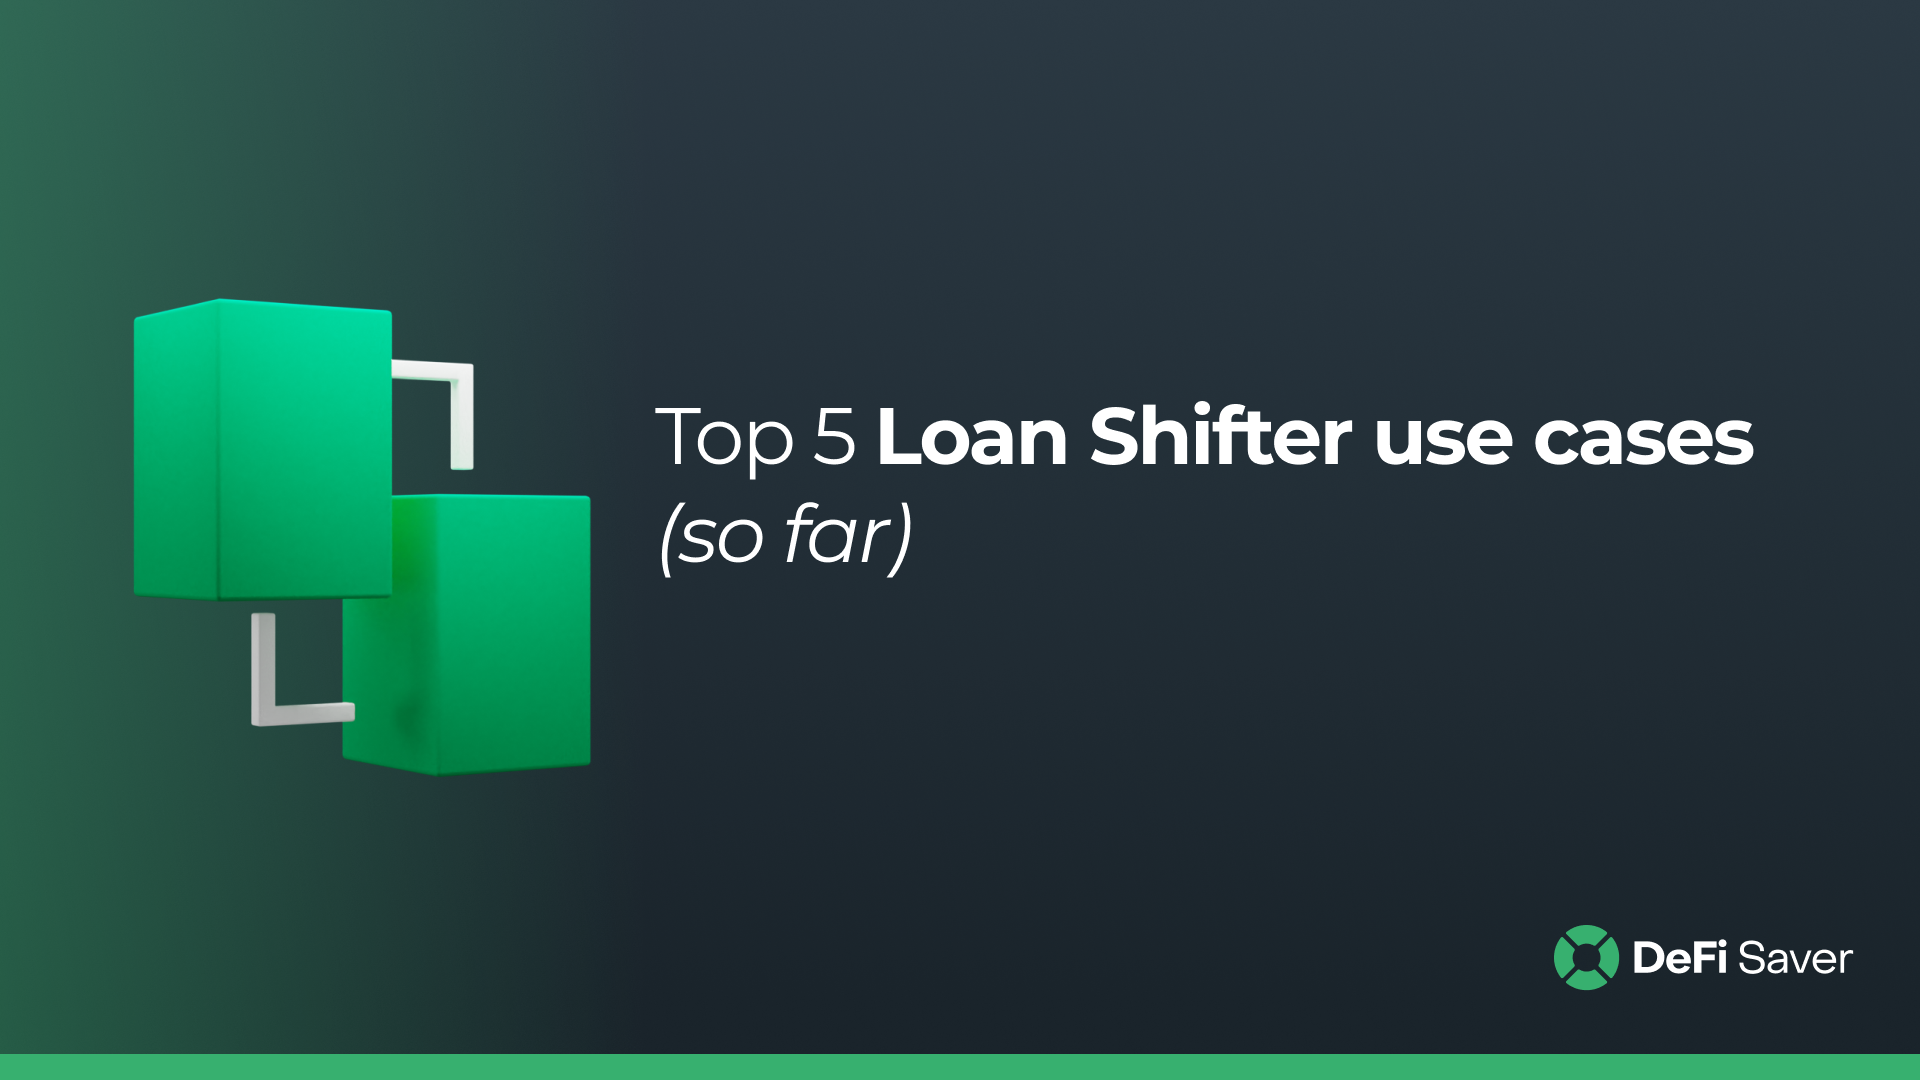 Top 5 most popular Loan Shifter use cases (so far)